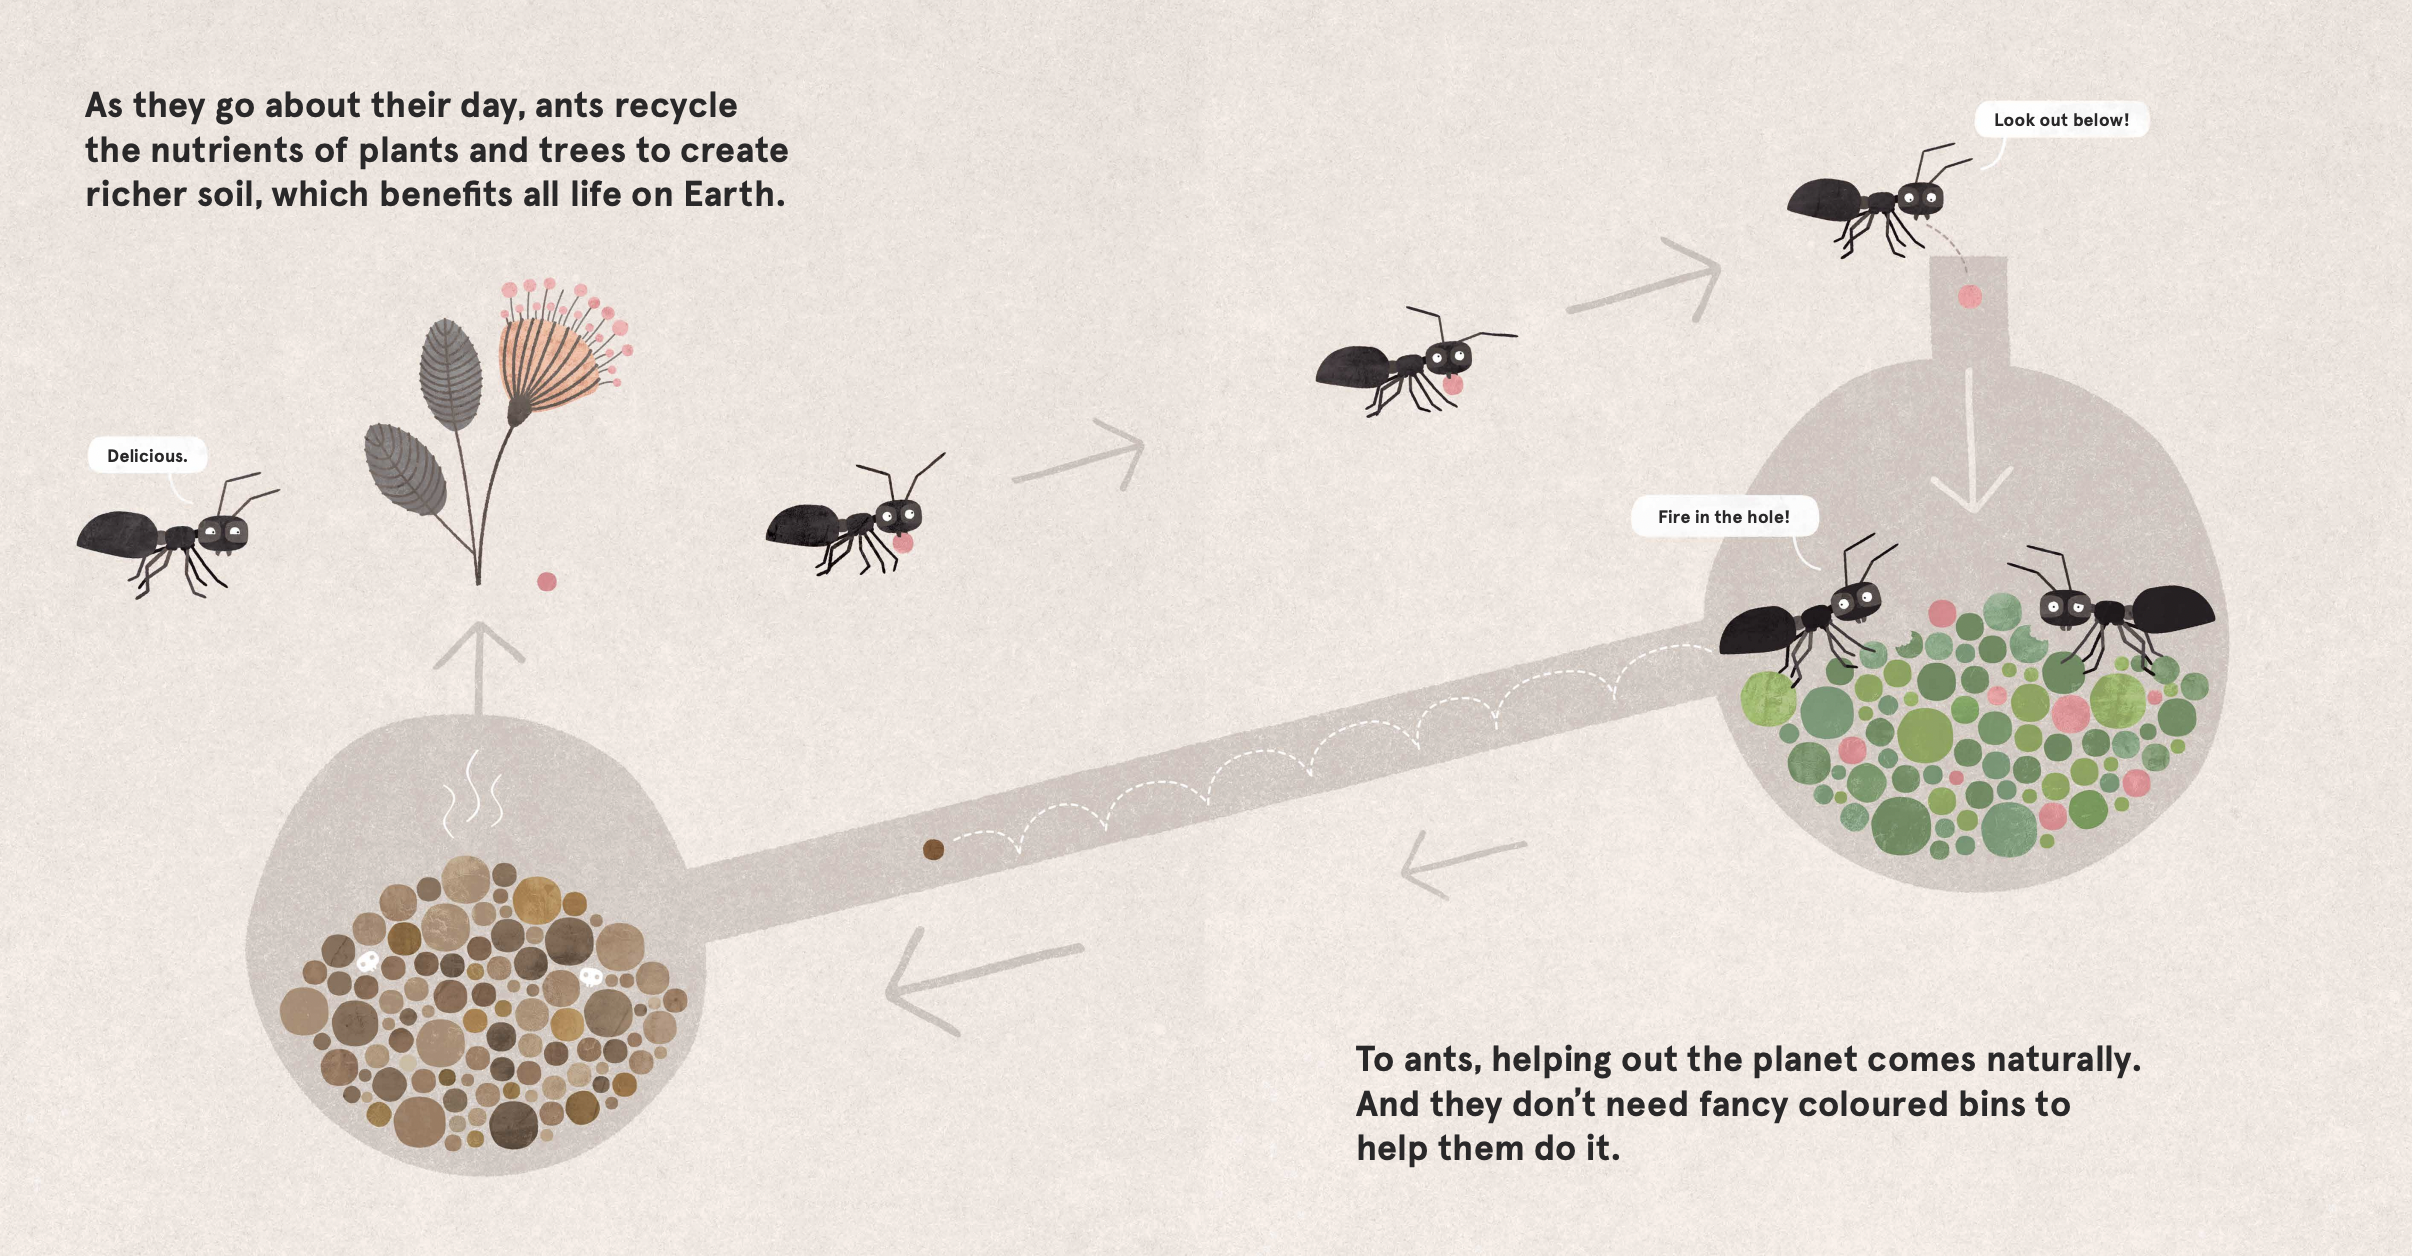 Illustration of how ants recycle nutrients